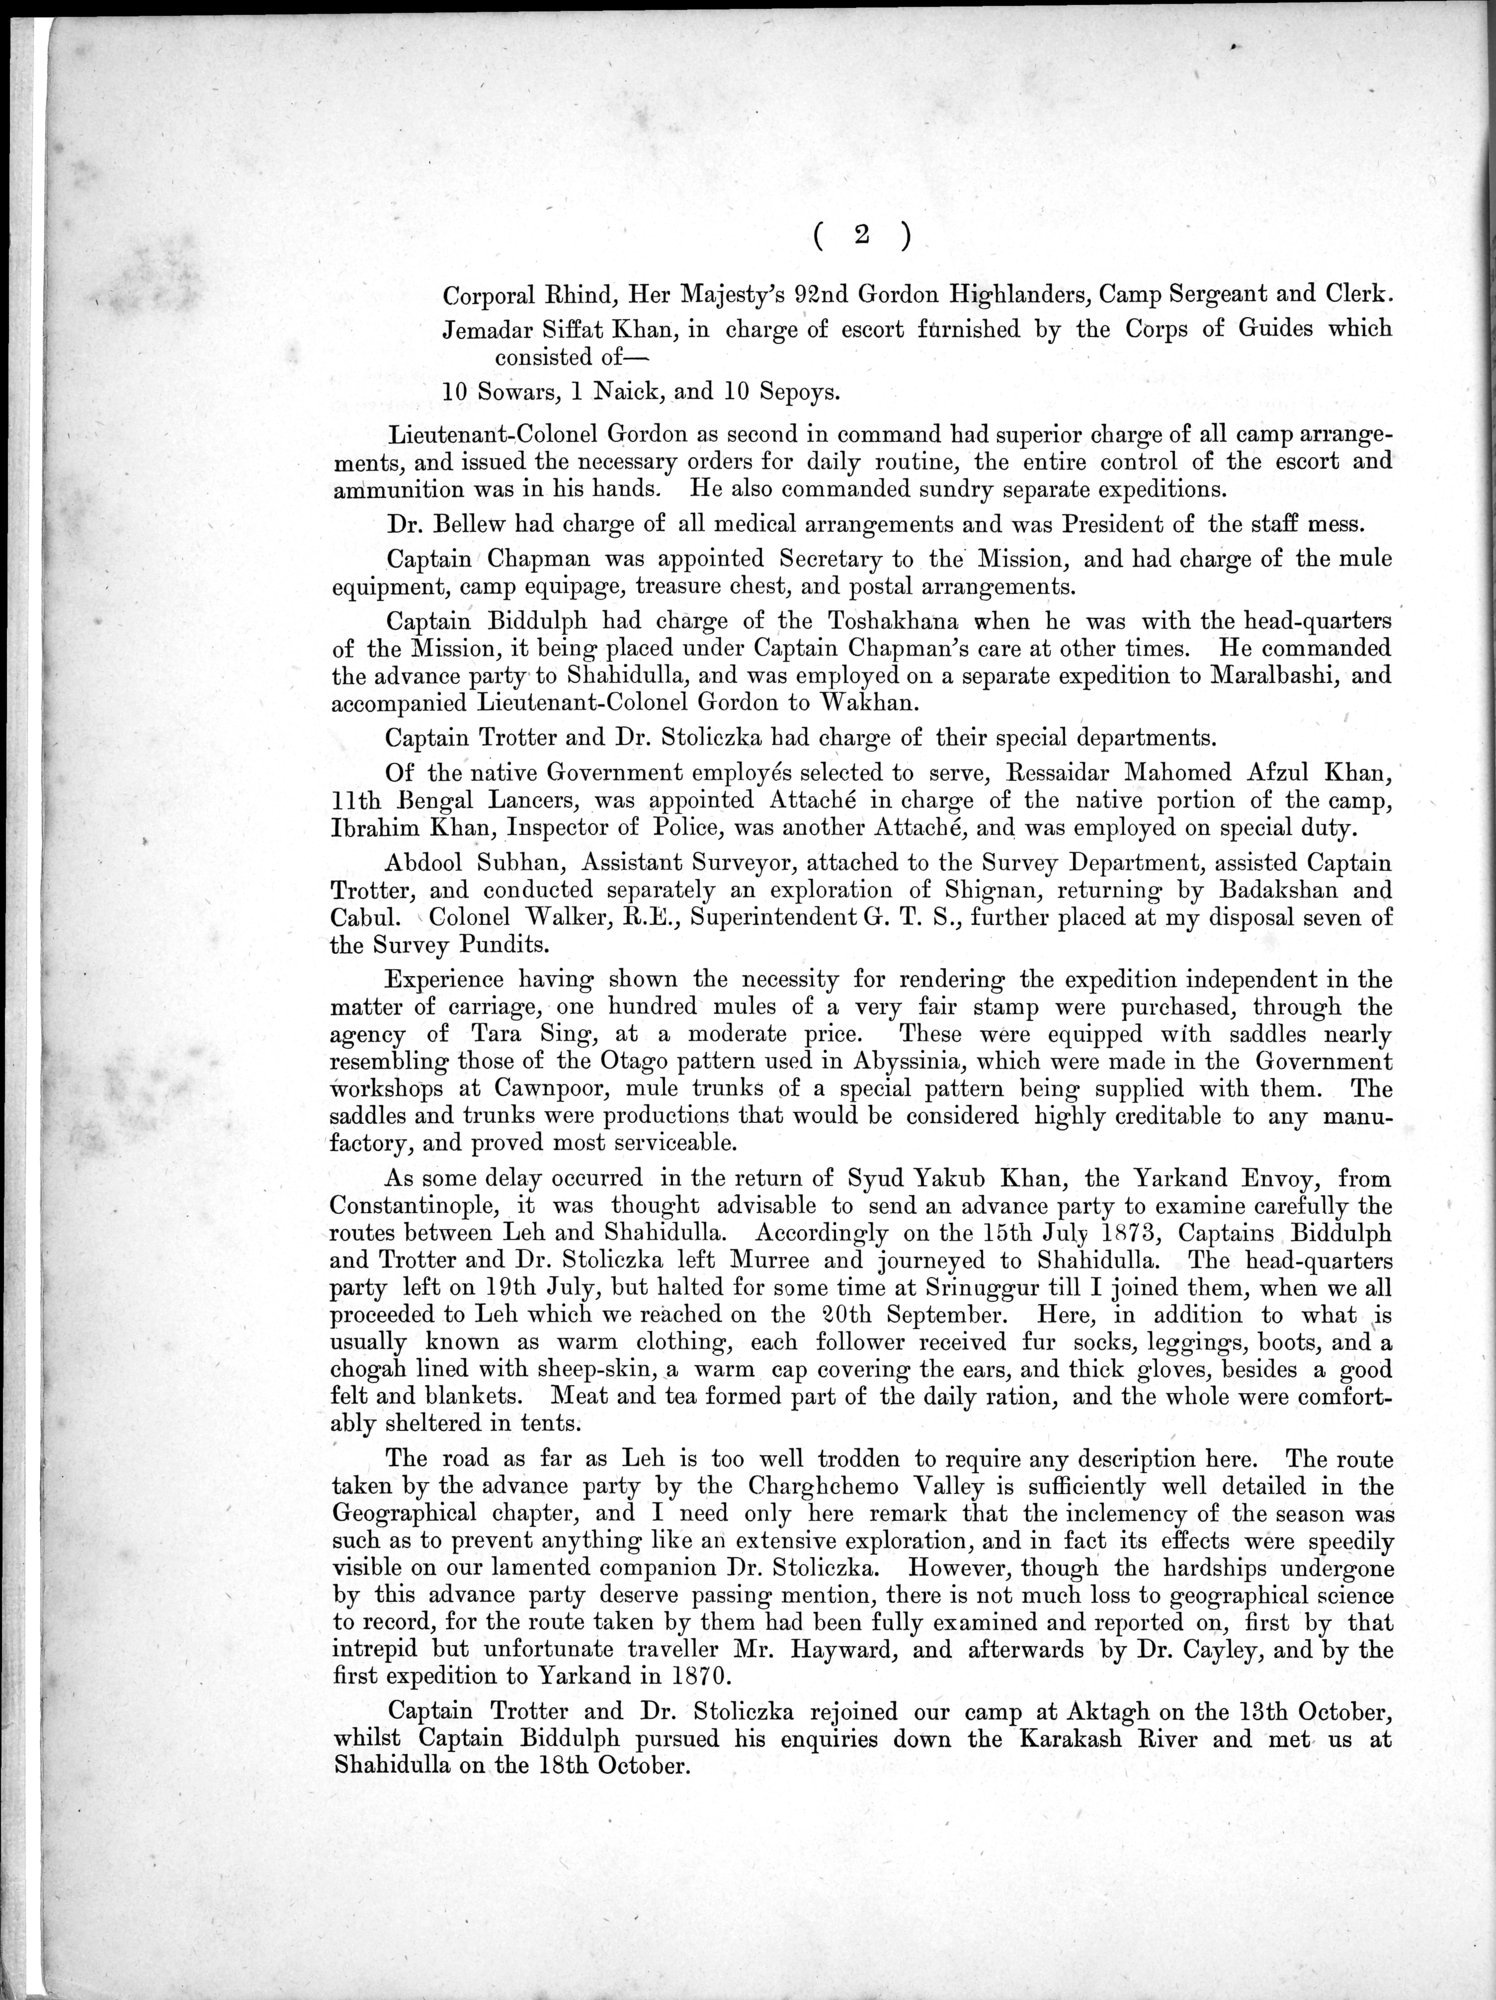 Report of a Mission to Yarkund in 1873 : vol.1 / Page 22 (Grayscale High Resolution Image)